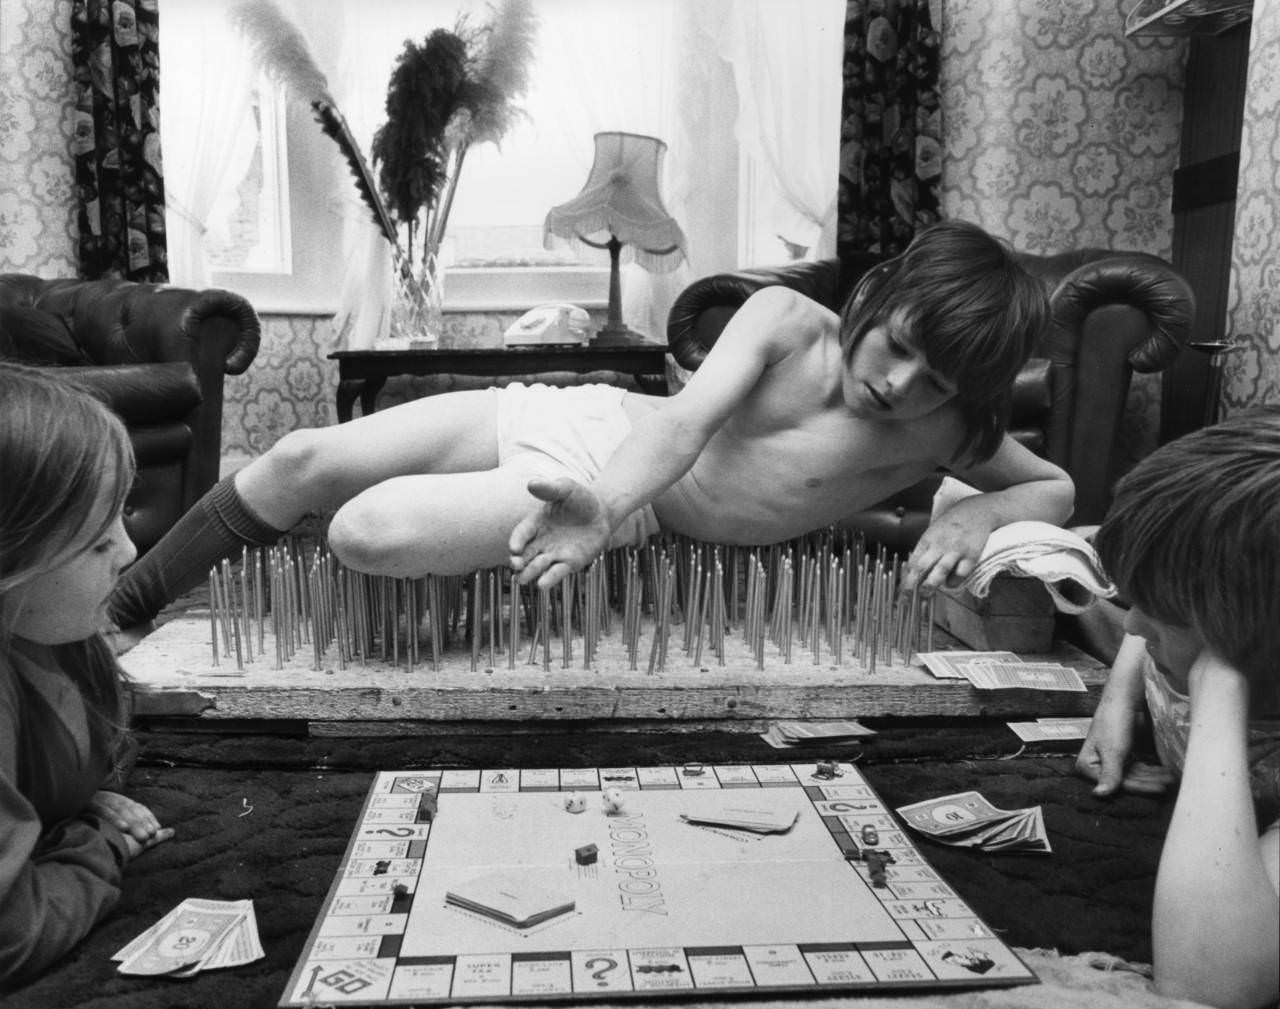 An 8 year old boy named Mark lies on a bed of nails while playing monopoly in London, England in 1976.